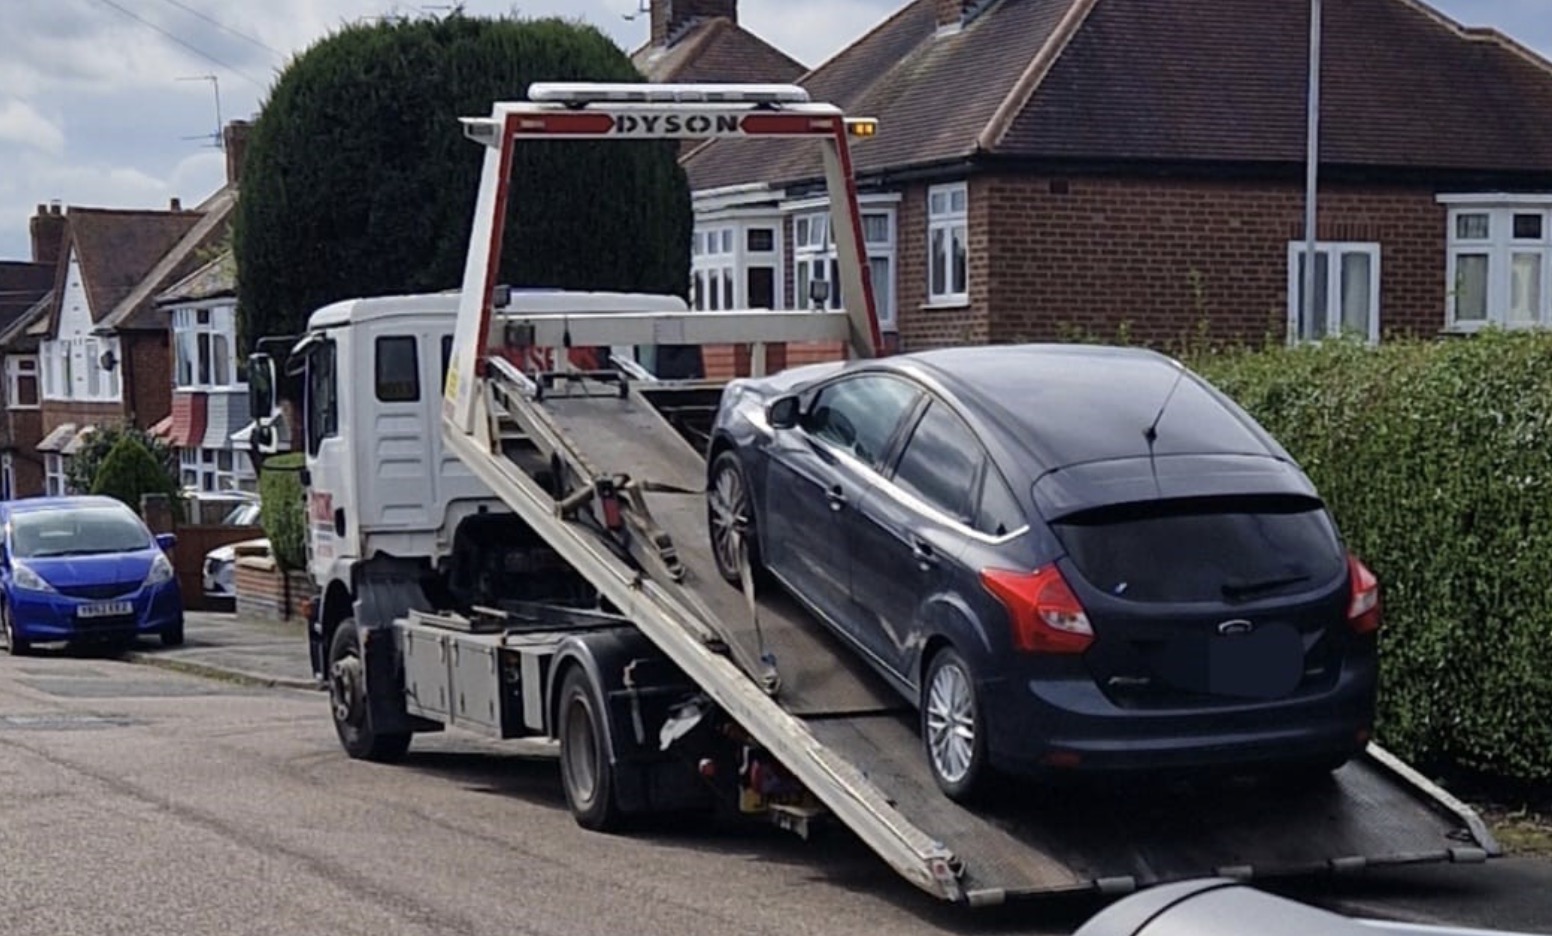 Police tow untaxed vehicles from Bradmore, Ruddington and Tollerton 